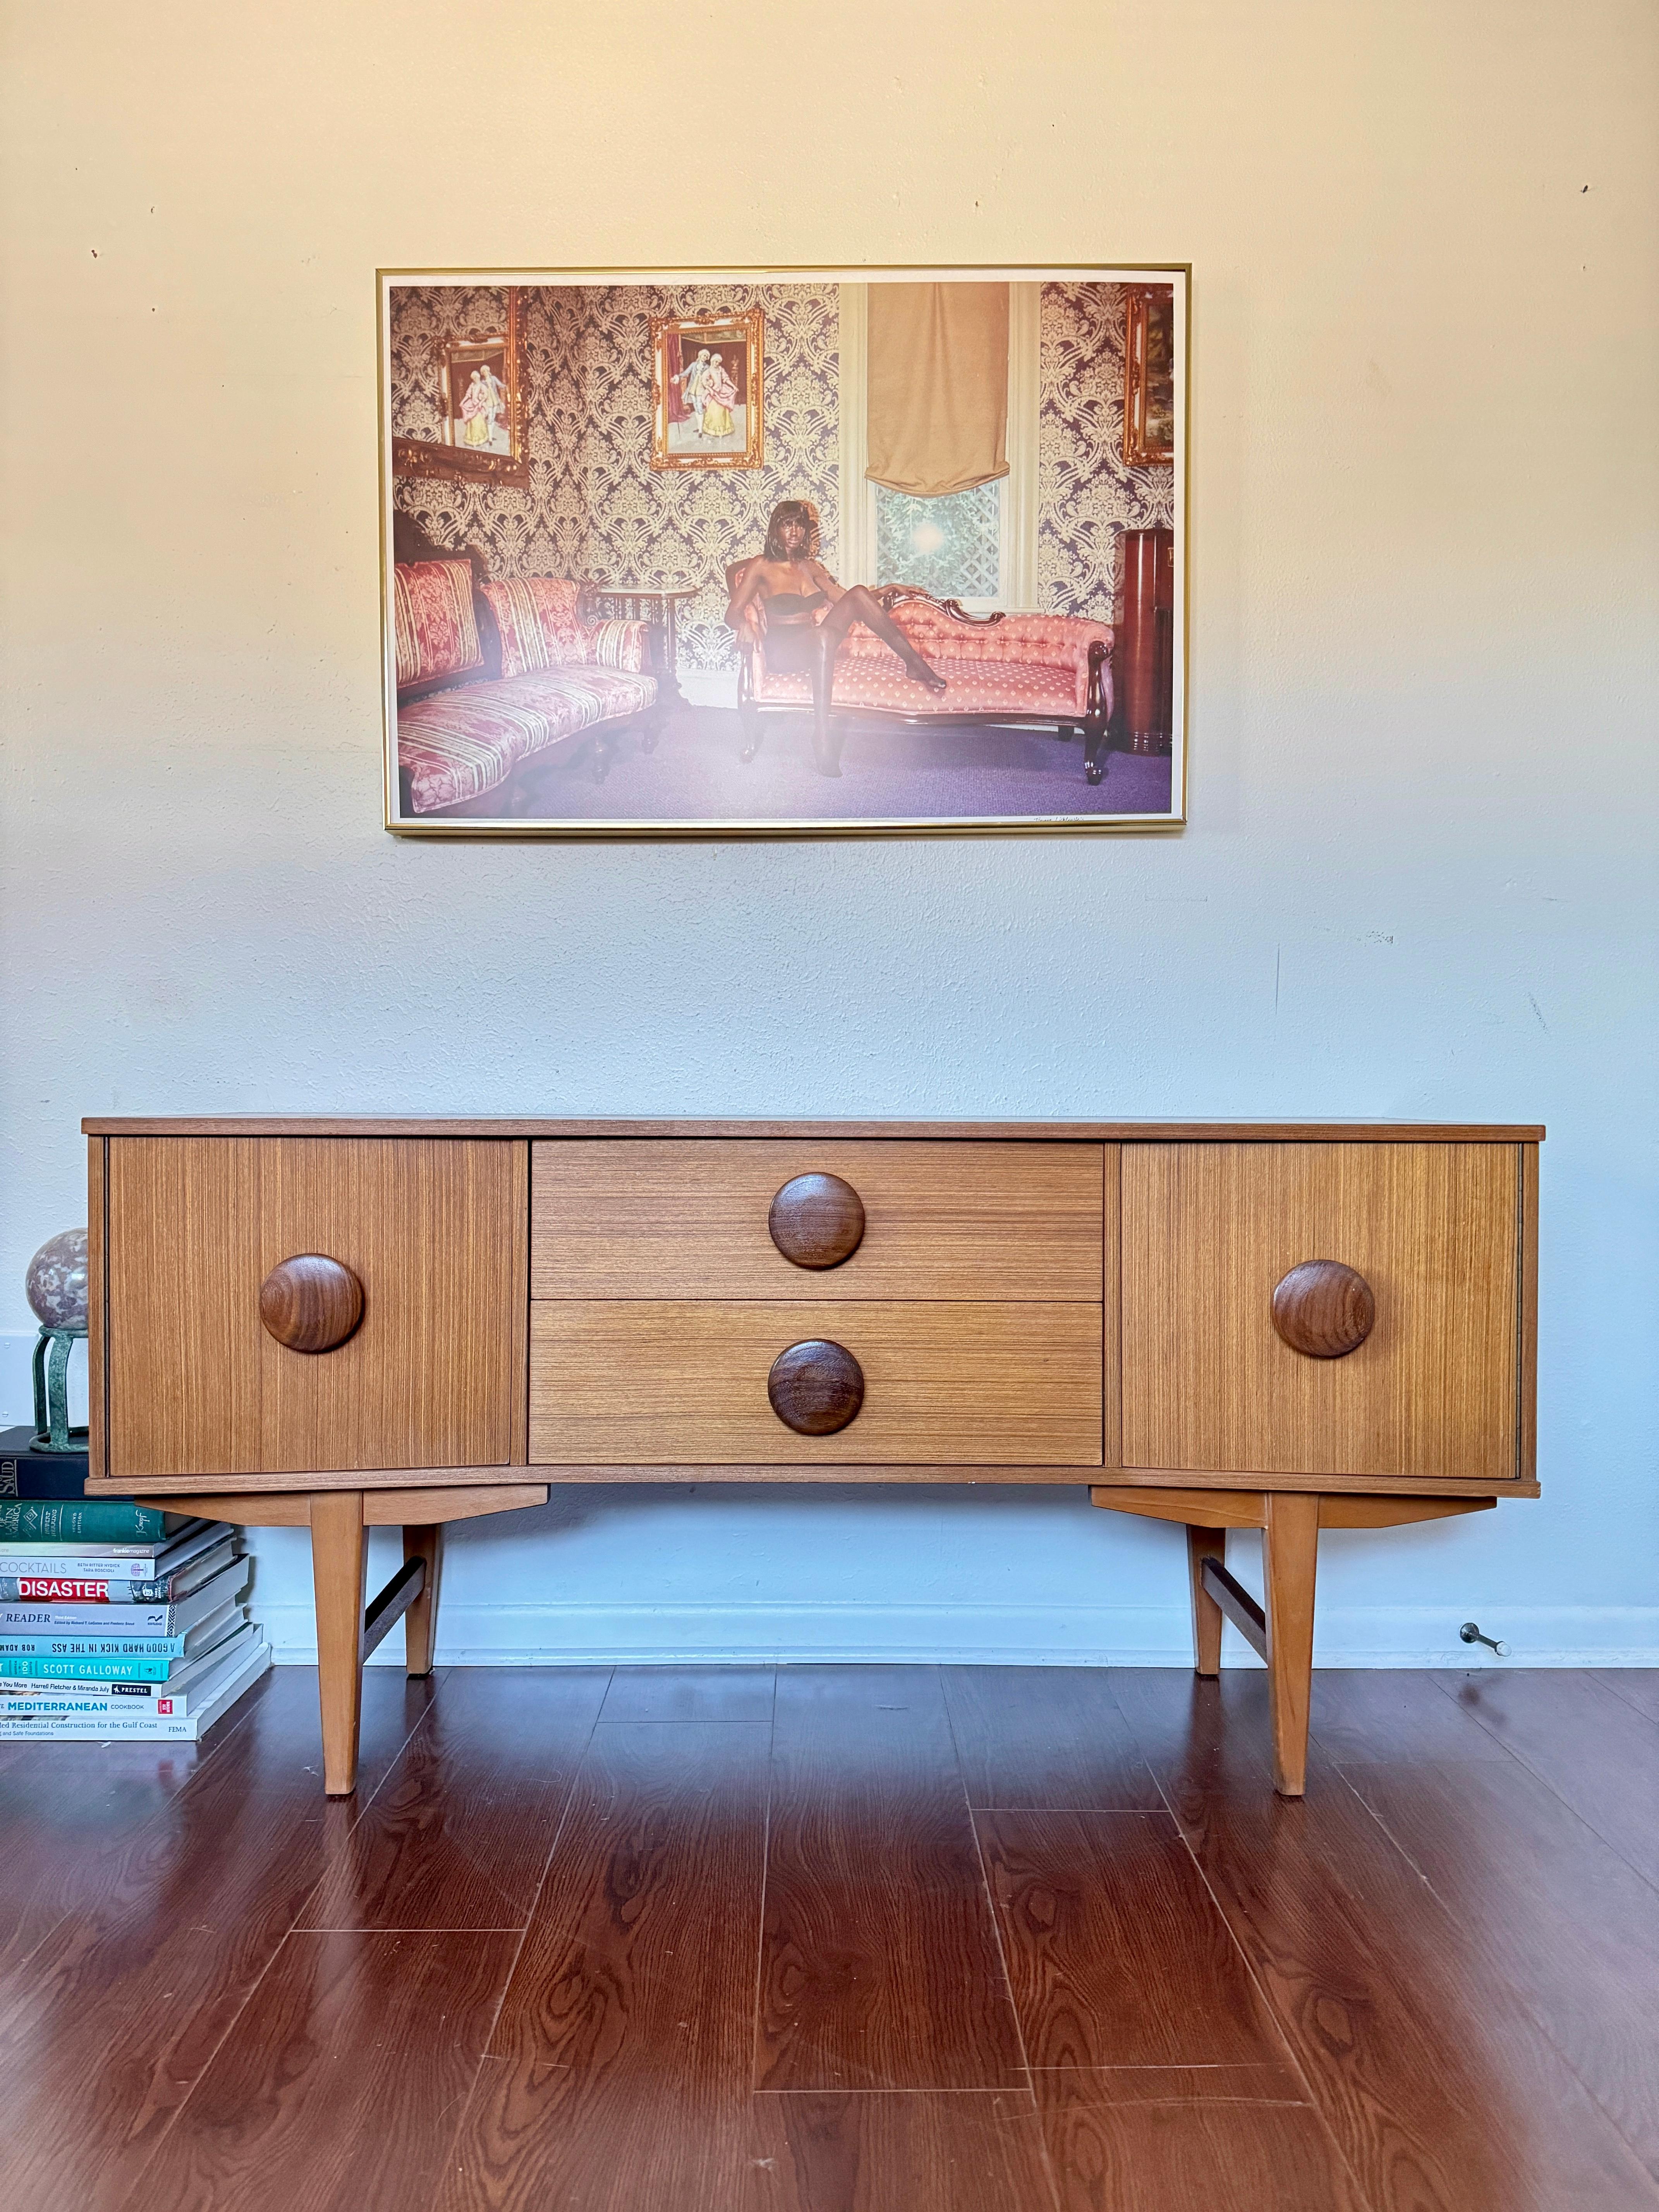 An MCM petite sideboard with button pulls, circa 1960s. Refined by its curve that gives it elegance and circular pulls that gives it a modern edge, this piece can go in any style home. Overall in very good original condition. Some discoloration on